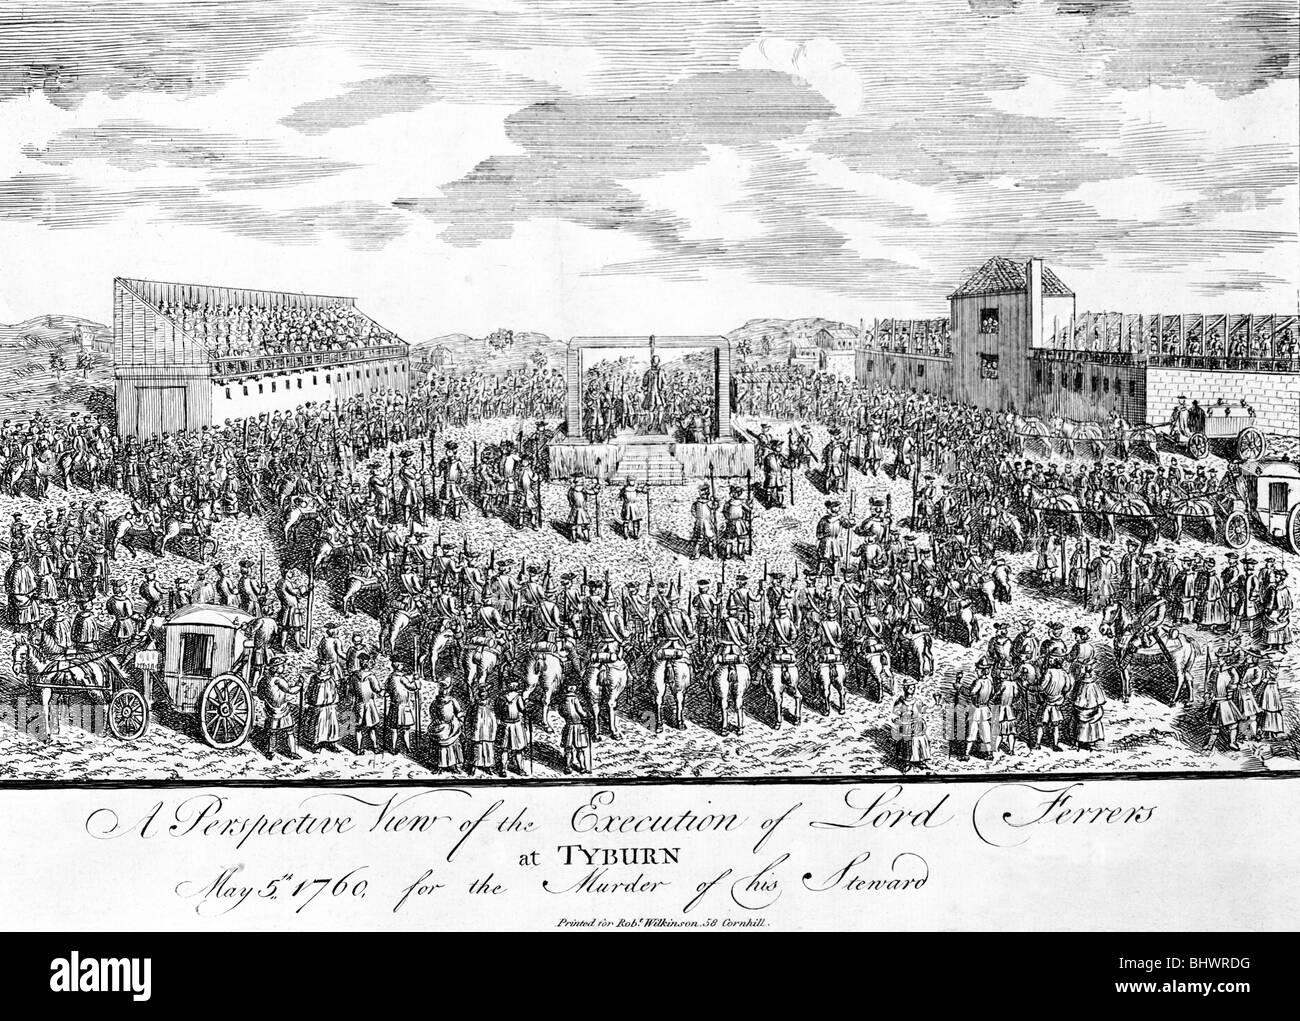 Execution of the Earl of Ferrers at Tyburn, Paddington, London, 1760 ...